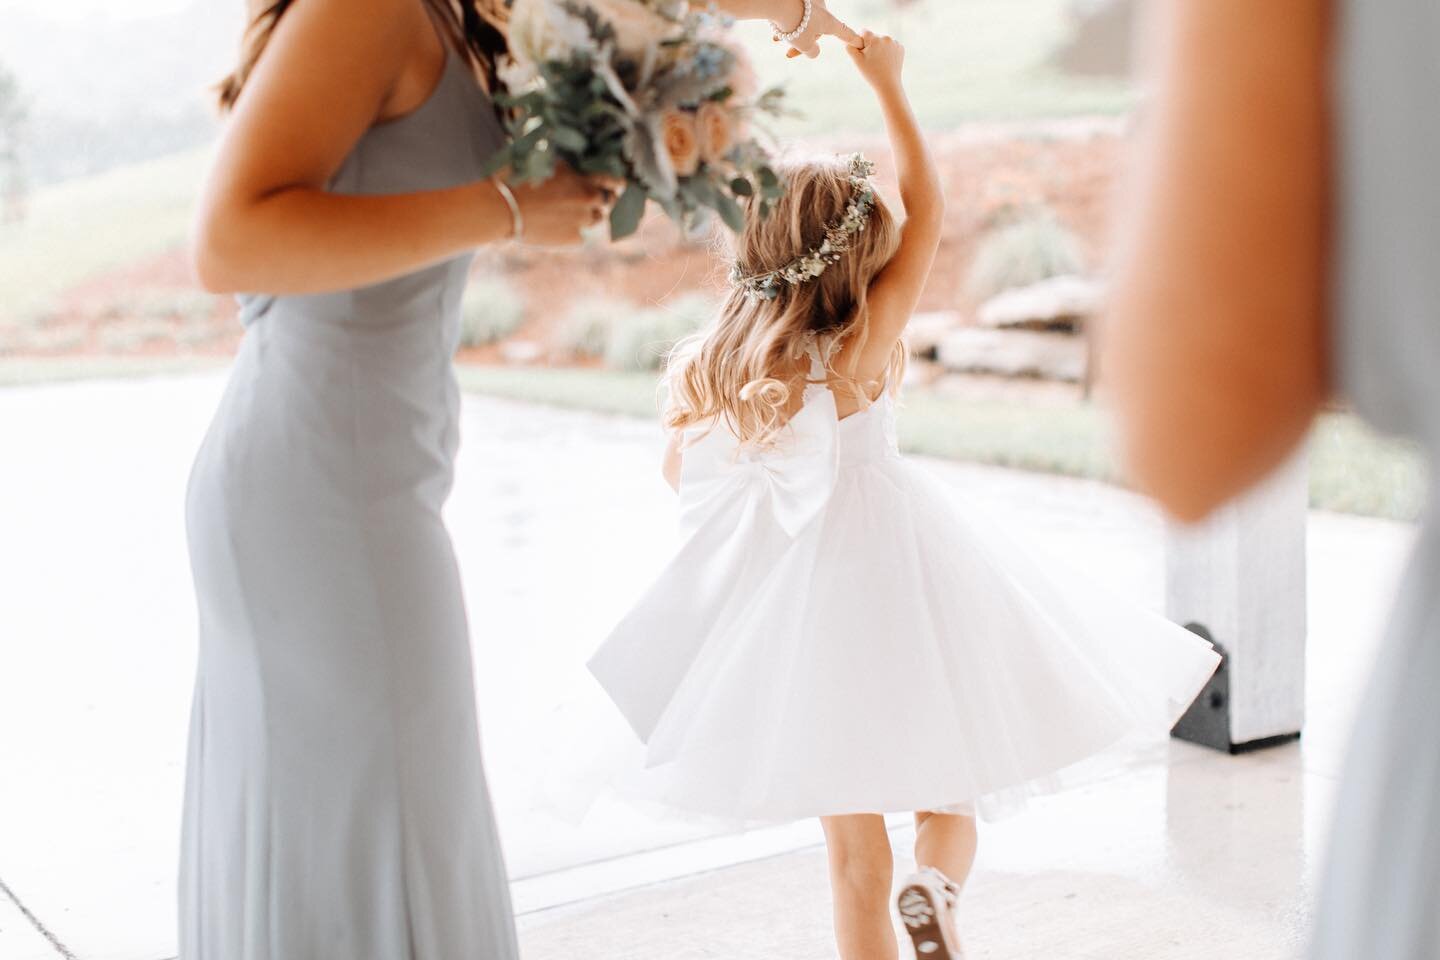 Twirling through the week like...

Photo: @swakphotography 
Lovely Bride: @kglodich 
Venue: @cranfordhollowtn 

It feels good to be back at wedding prep! I&rsquo;ve got an amazingly lovely wedding this weekend I can&rsquo;t wait to share!